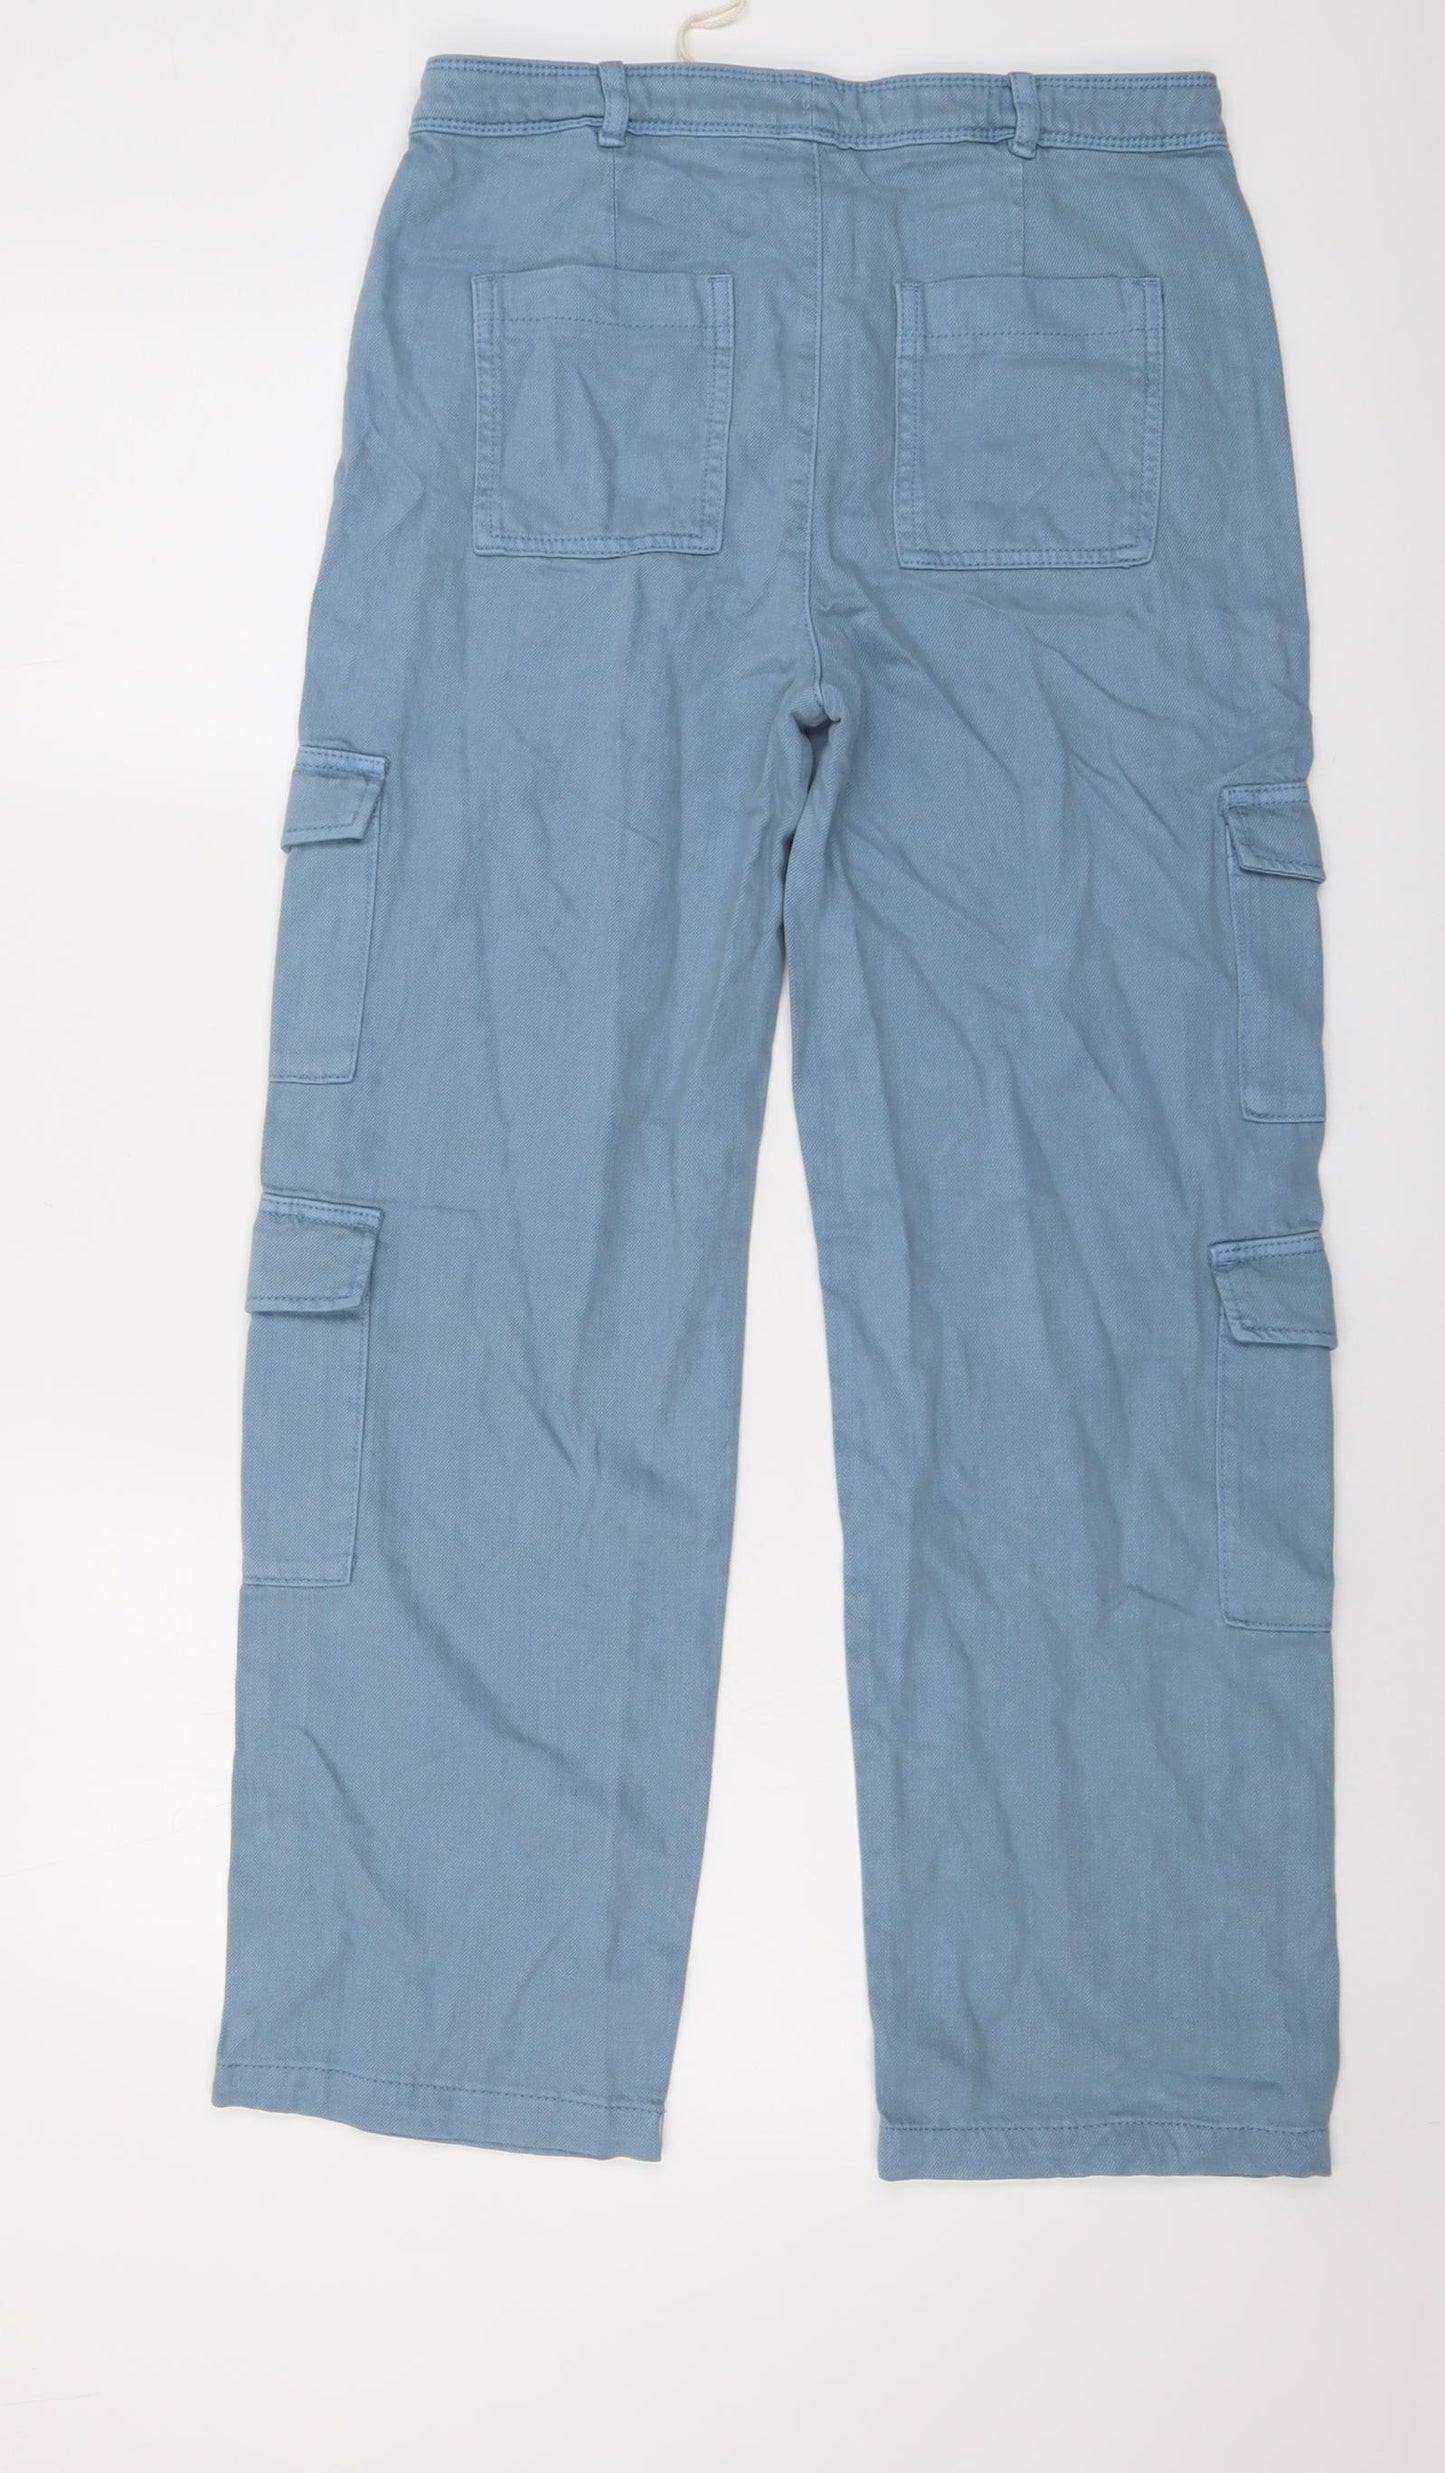 Marks and Spencer Girls Blue Cotton Straight Jeans Size 13-14 Years Regular Button - Cargo